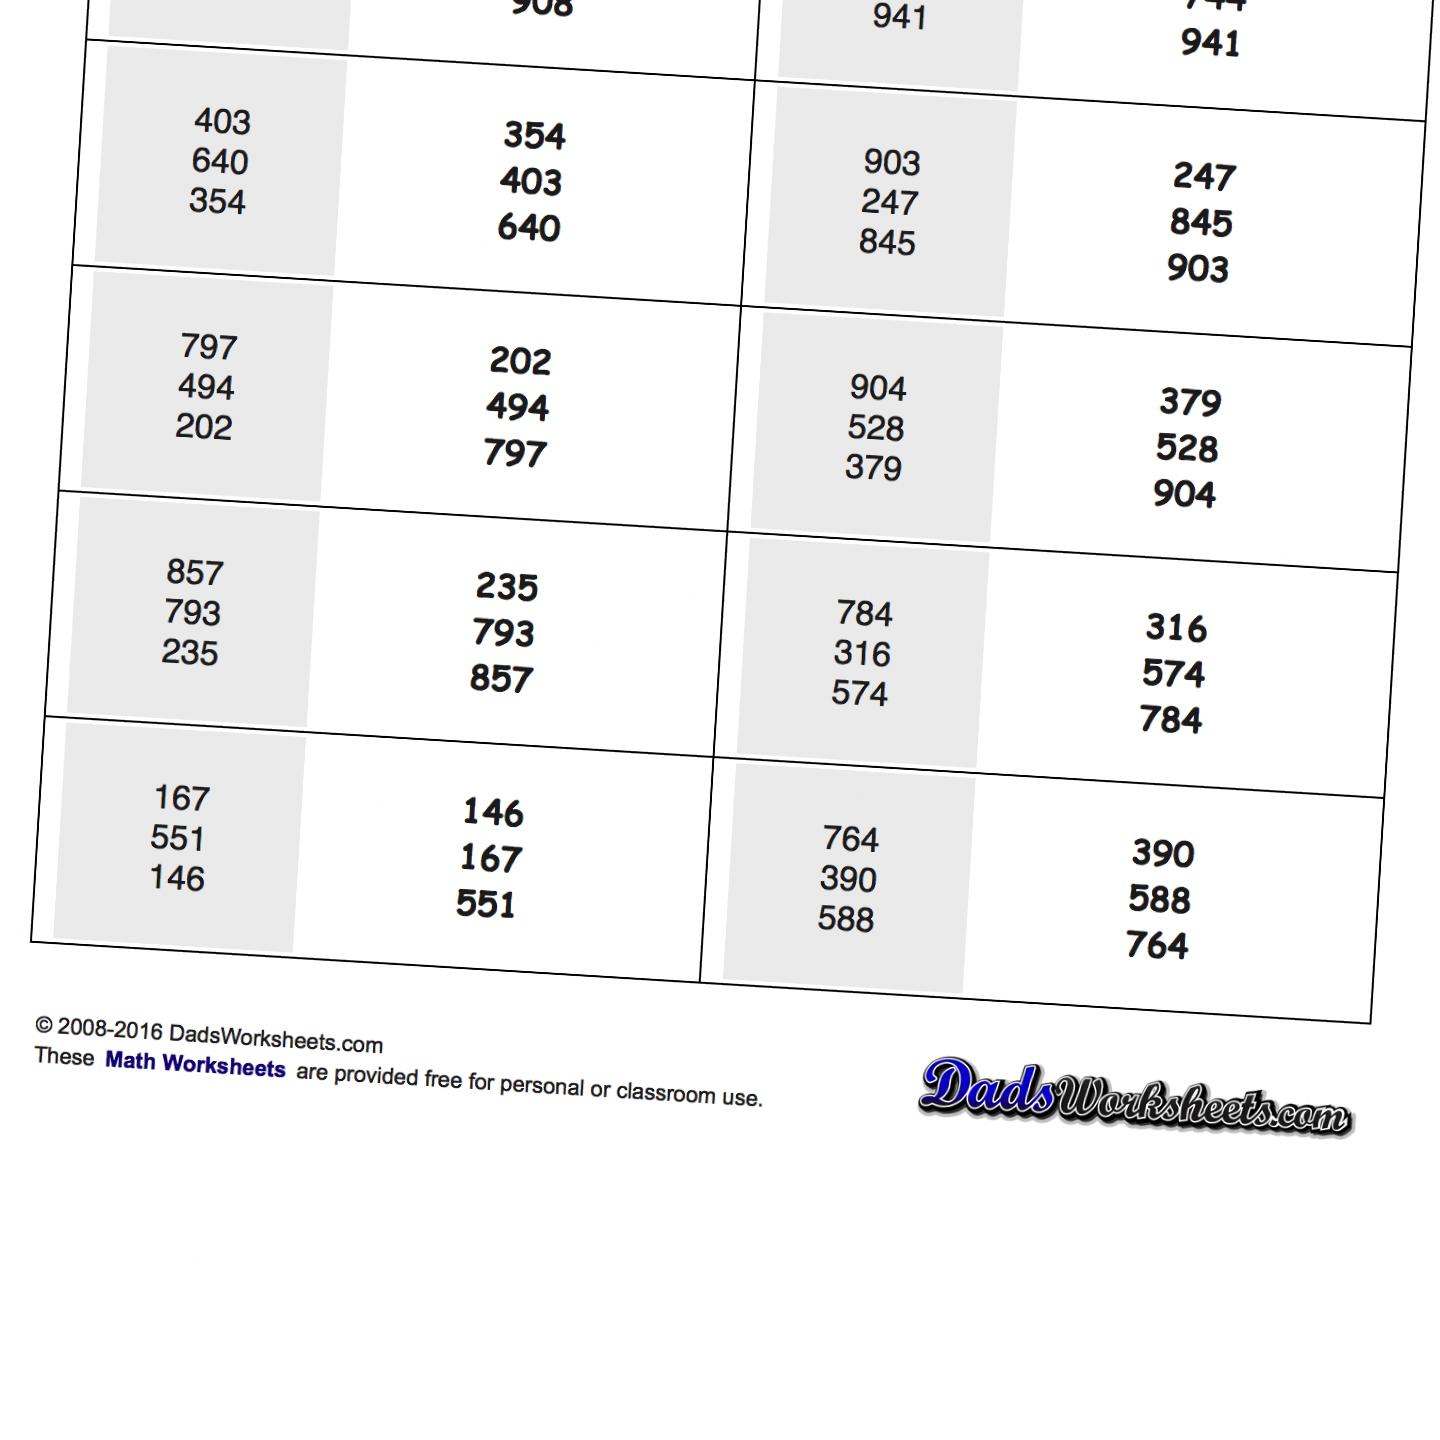 ordering-numbers-worksheet-arrange-the-numbers-from-greatest-to-least-mathematics-stock-vector